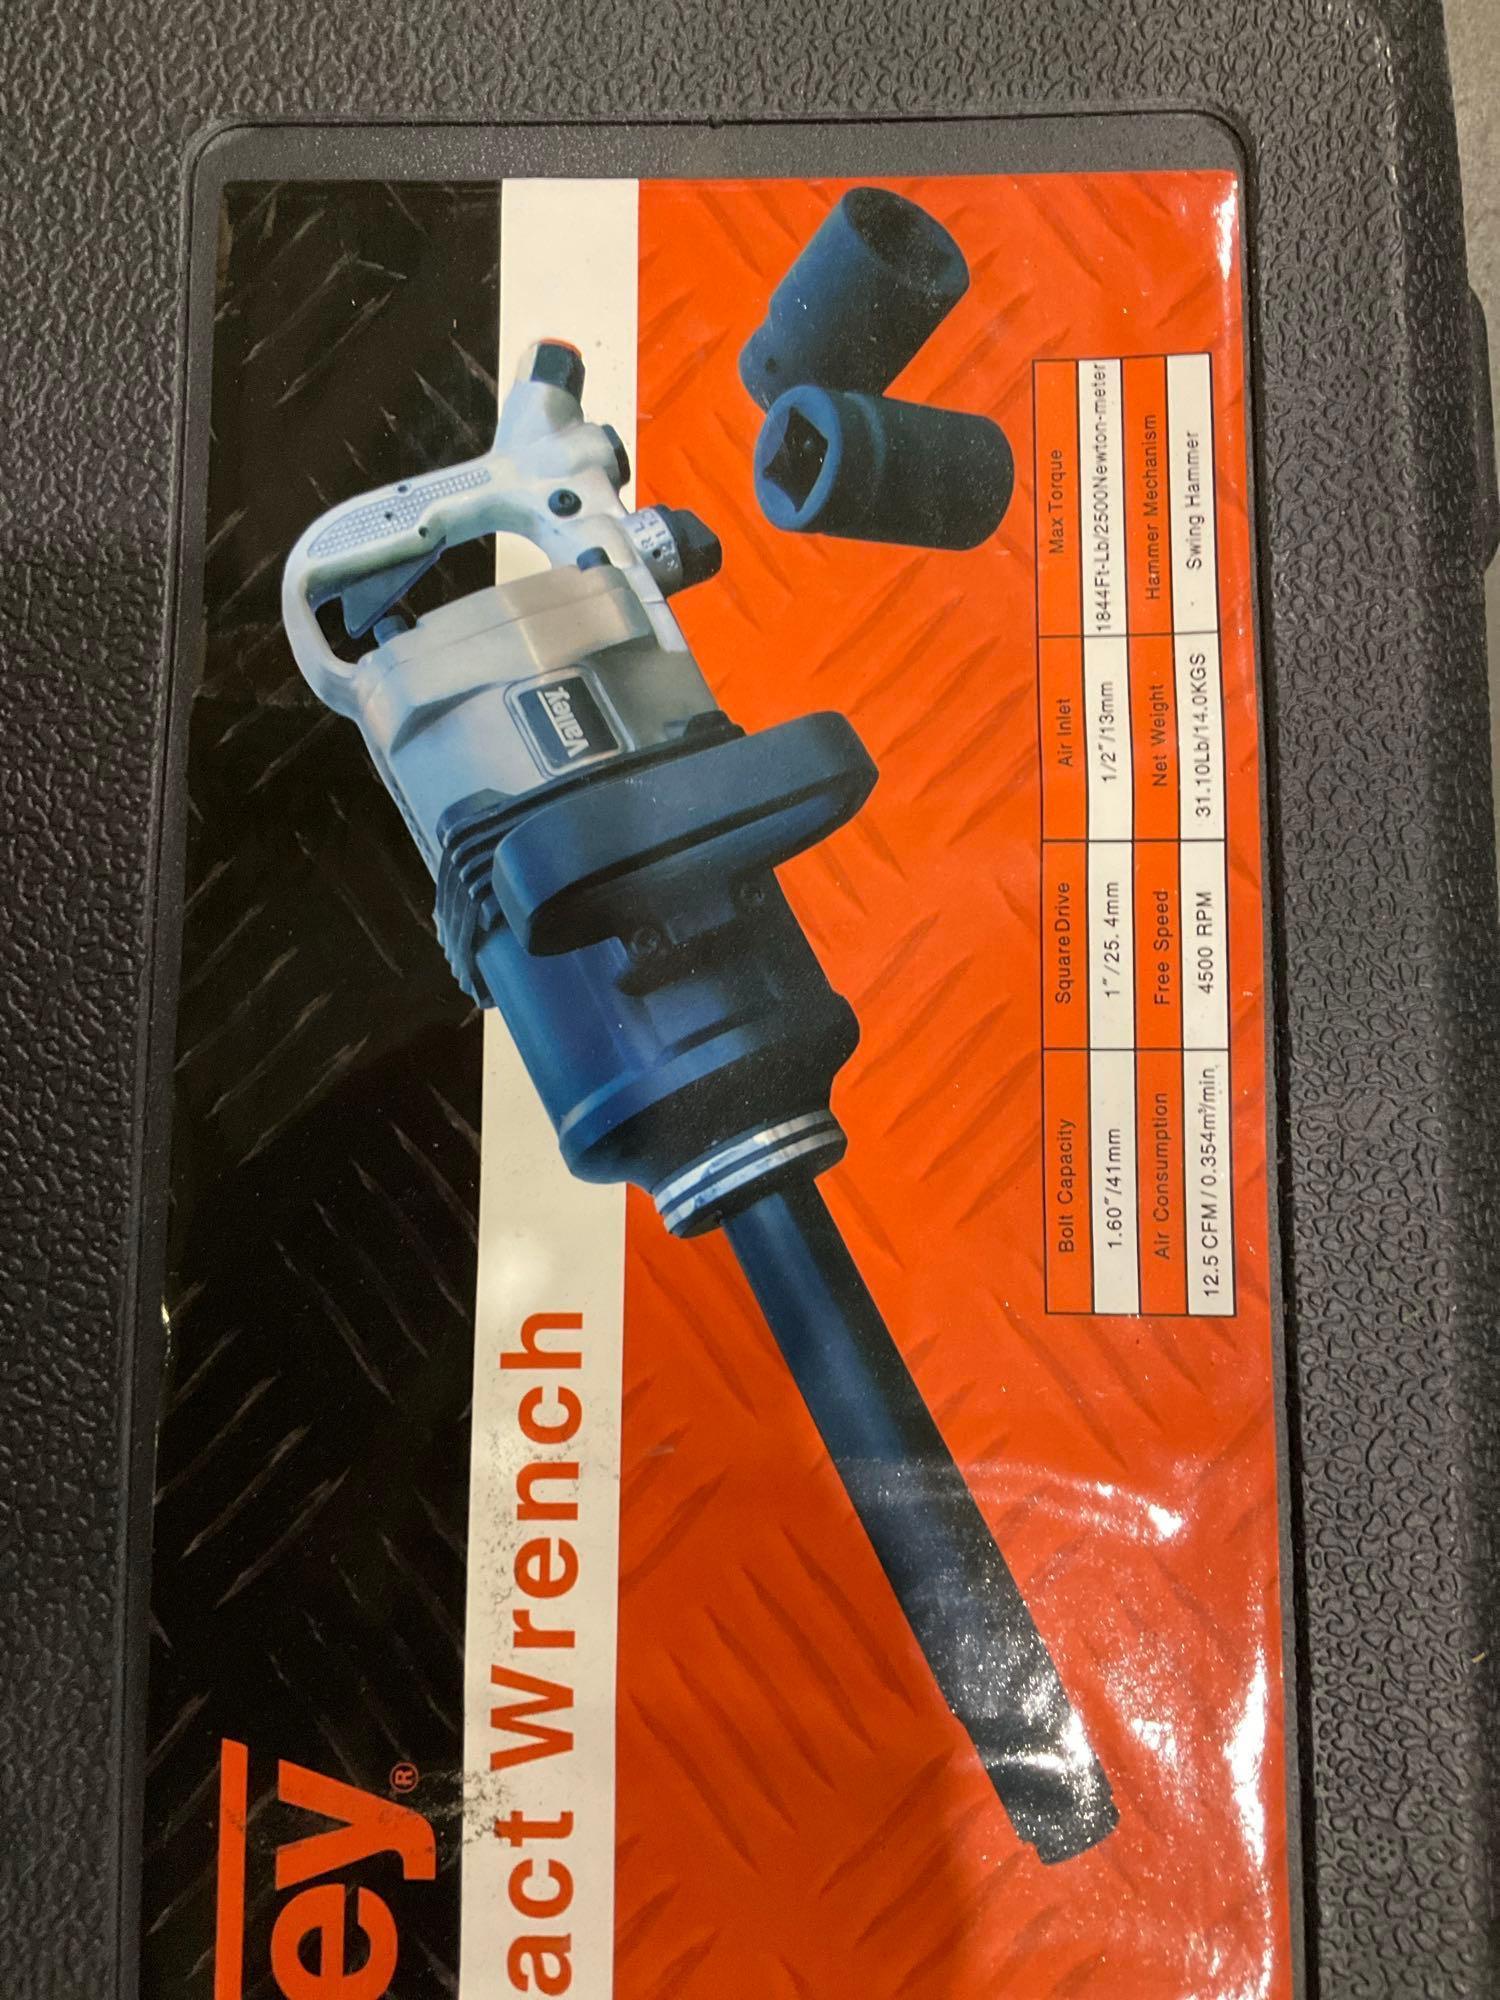 UNUSED VALLEY 1 " DR LONG ANVIL IMPACT WRENCH AIRIW-01B IN CARRYING CASE